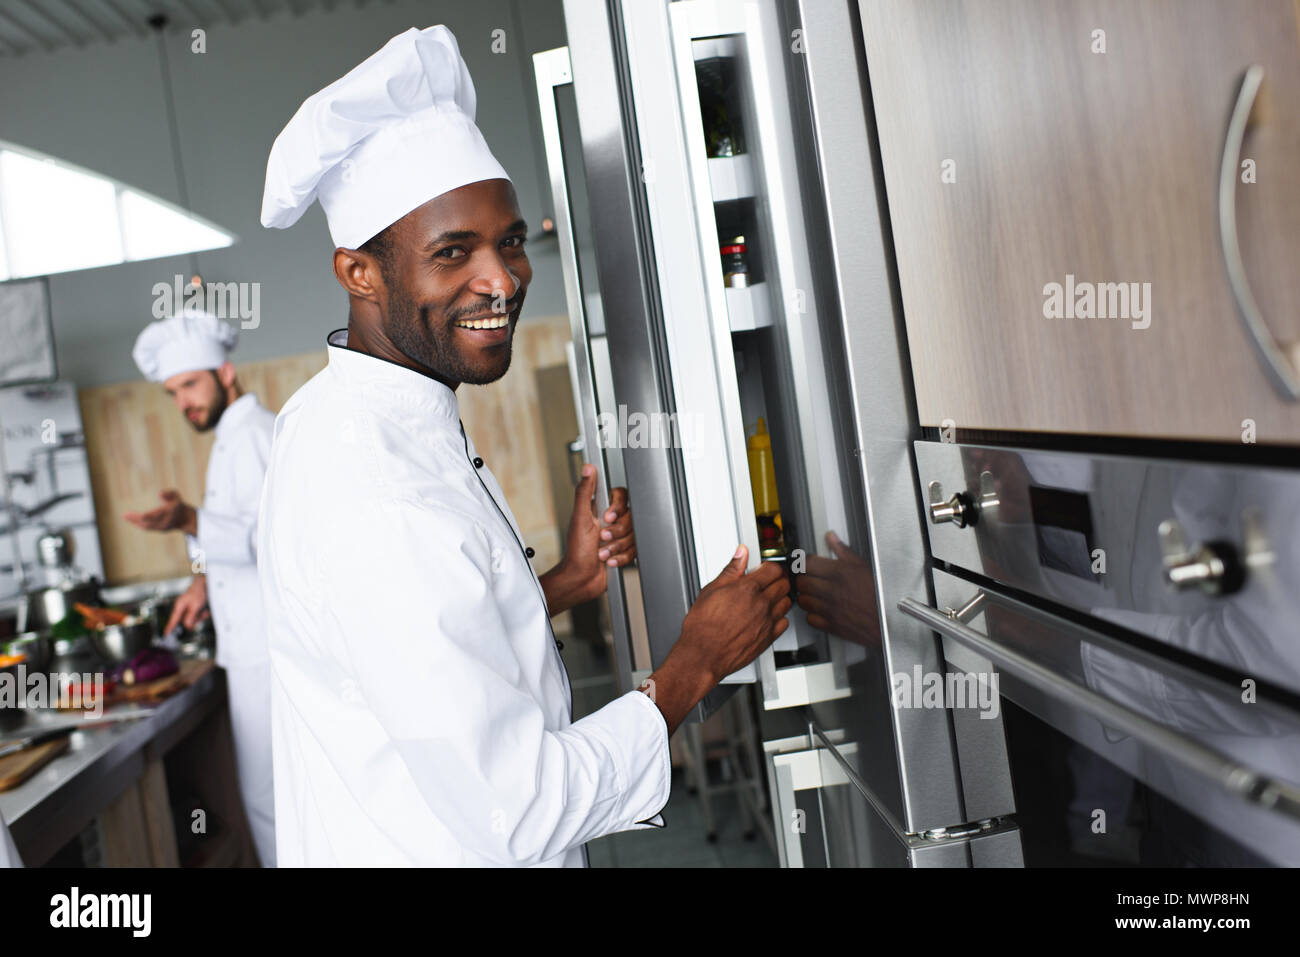 Multiracial team of cooks working on professional restaurant kitchen Stock Photo